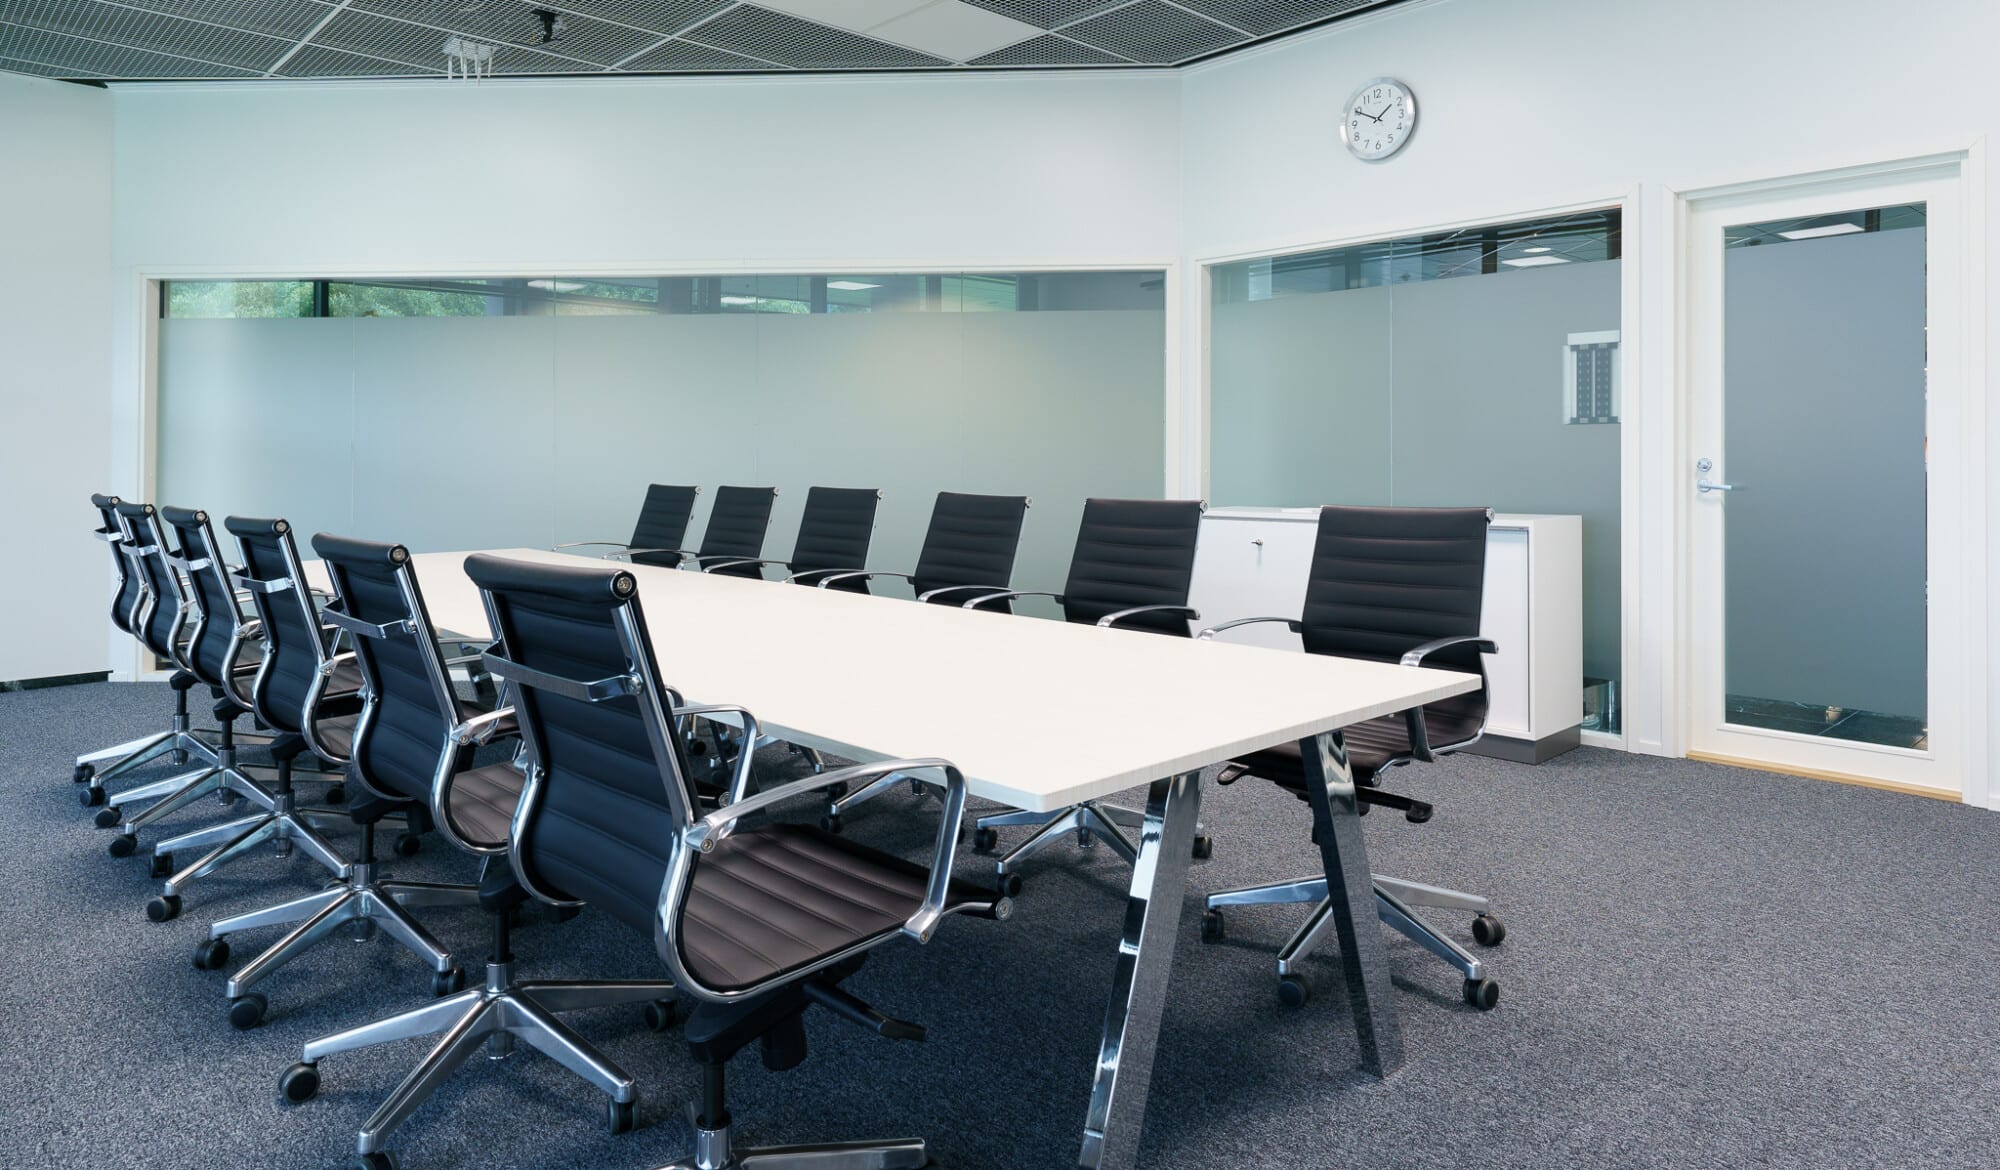 Located in Peltola campus the meeting room is easy to reach by car and public transport. The meeting room is suitable for lunch meetings.